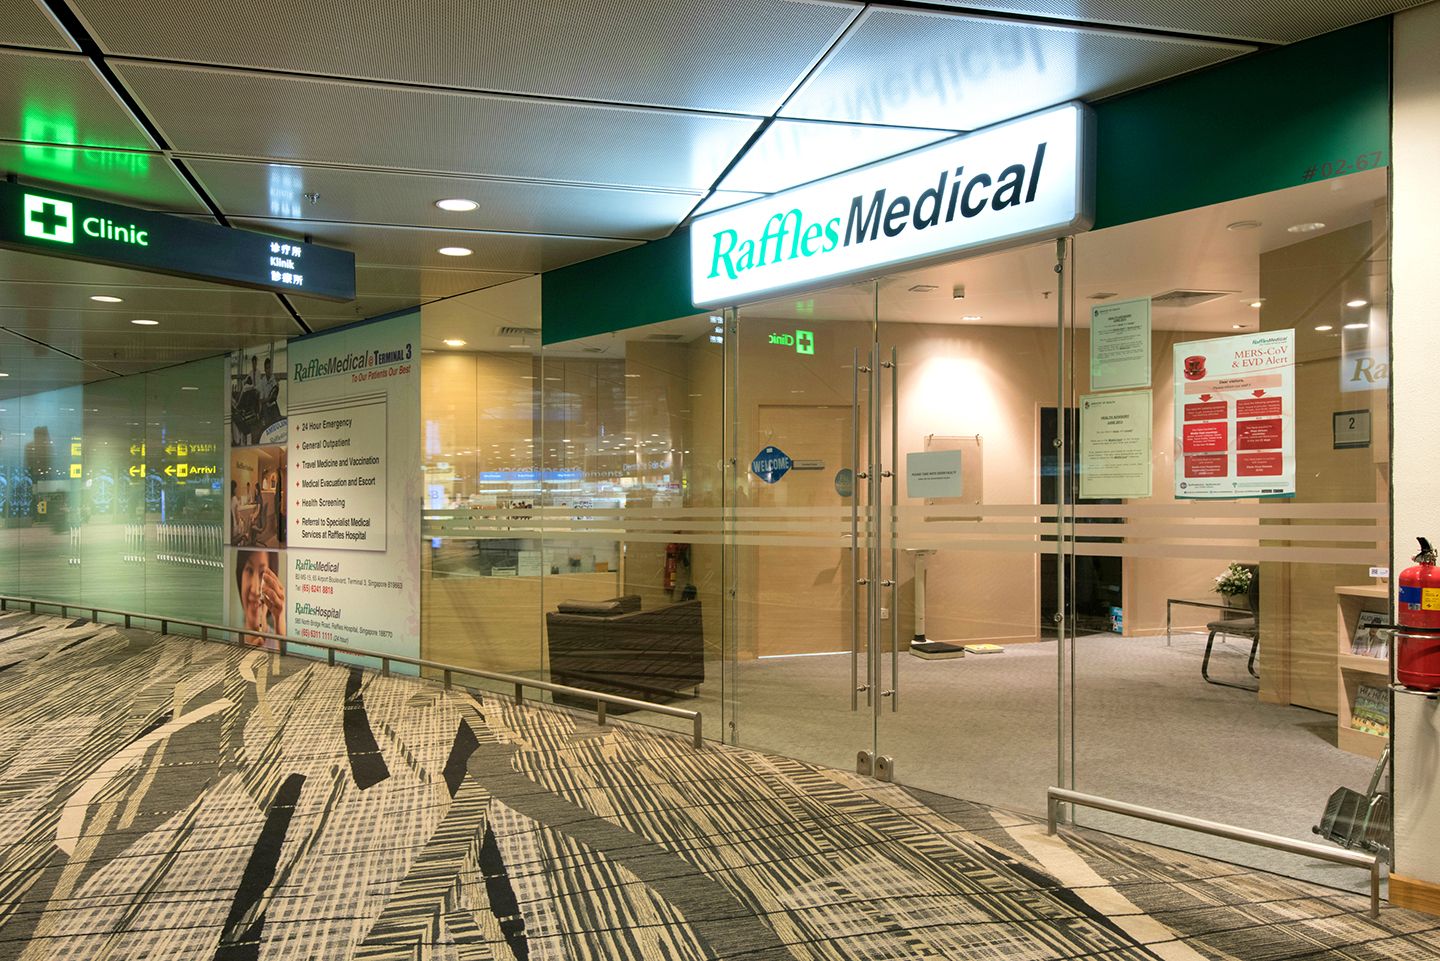 Raffles Medical: One of the clinics at Changi Airport that offers medical assistance